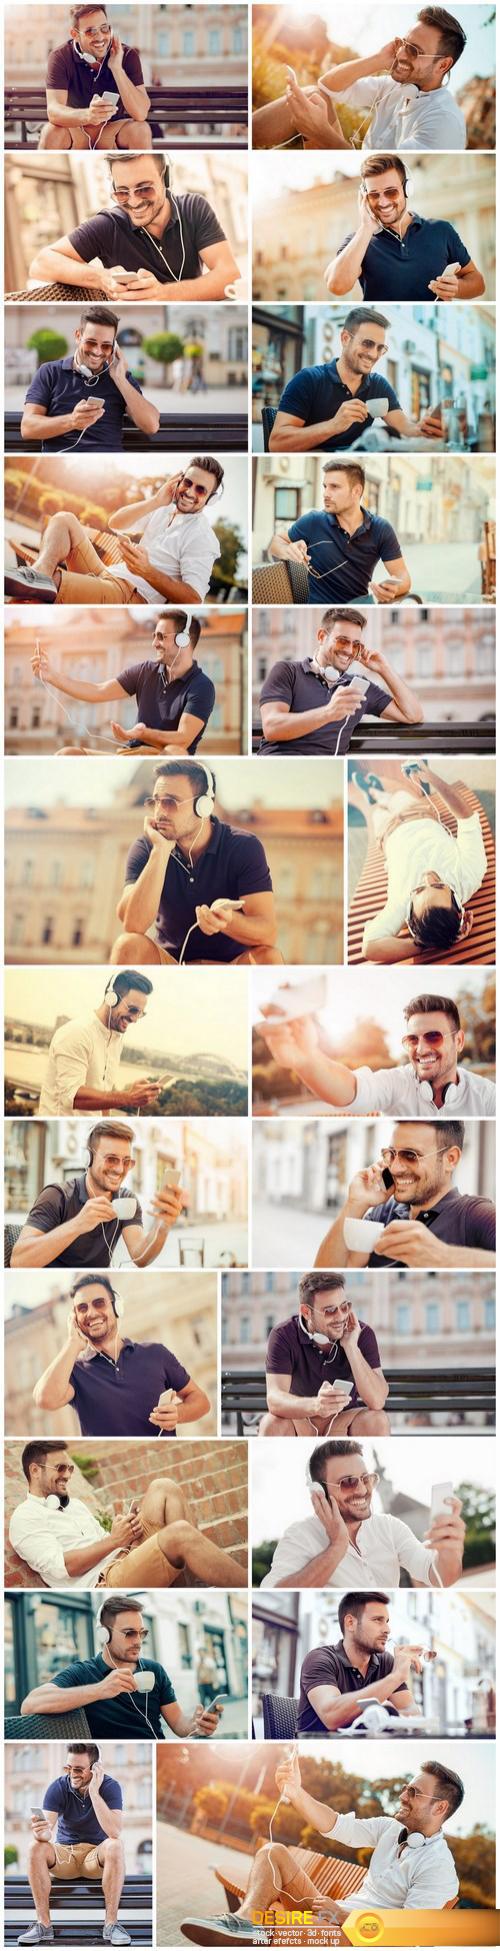 Smiling handsome guy listening to music - 24xUHQ JPEG Photo Stock